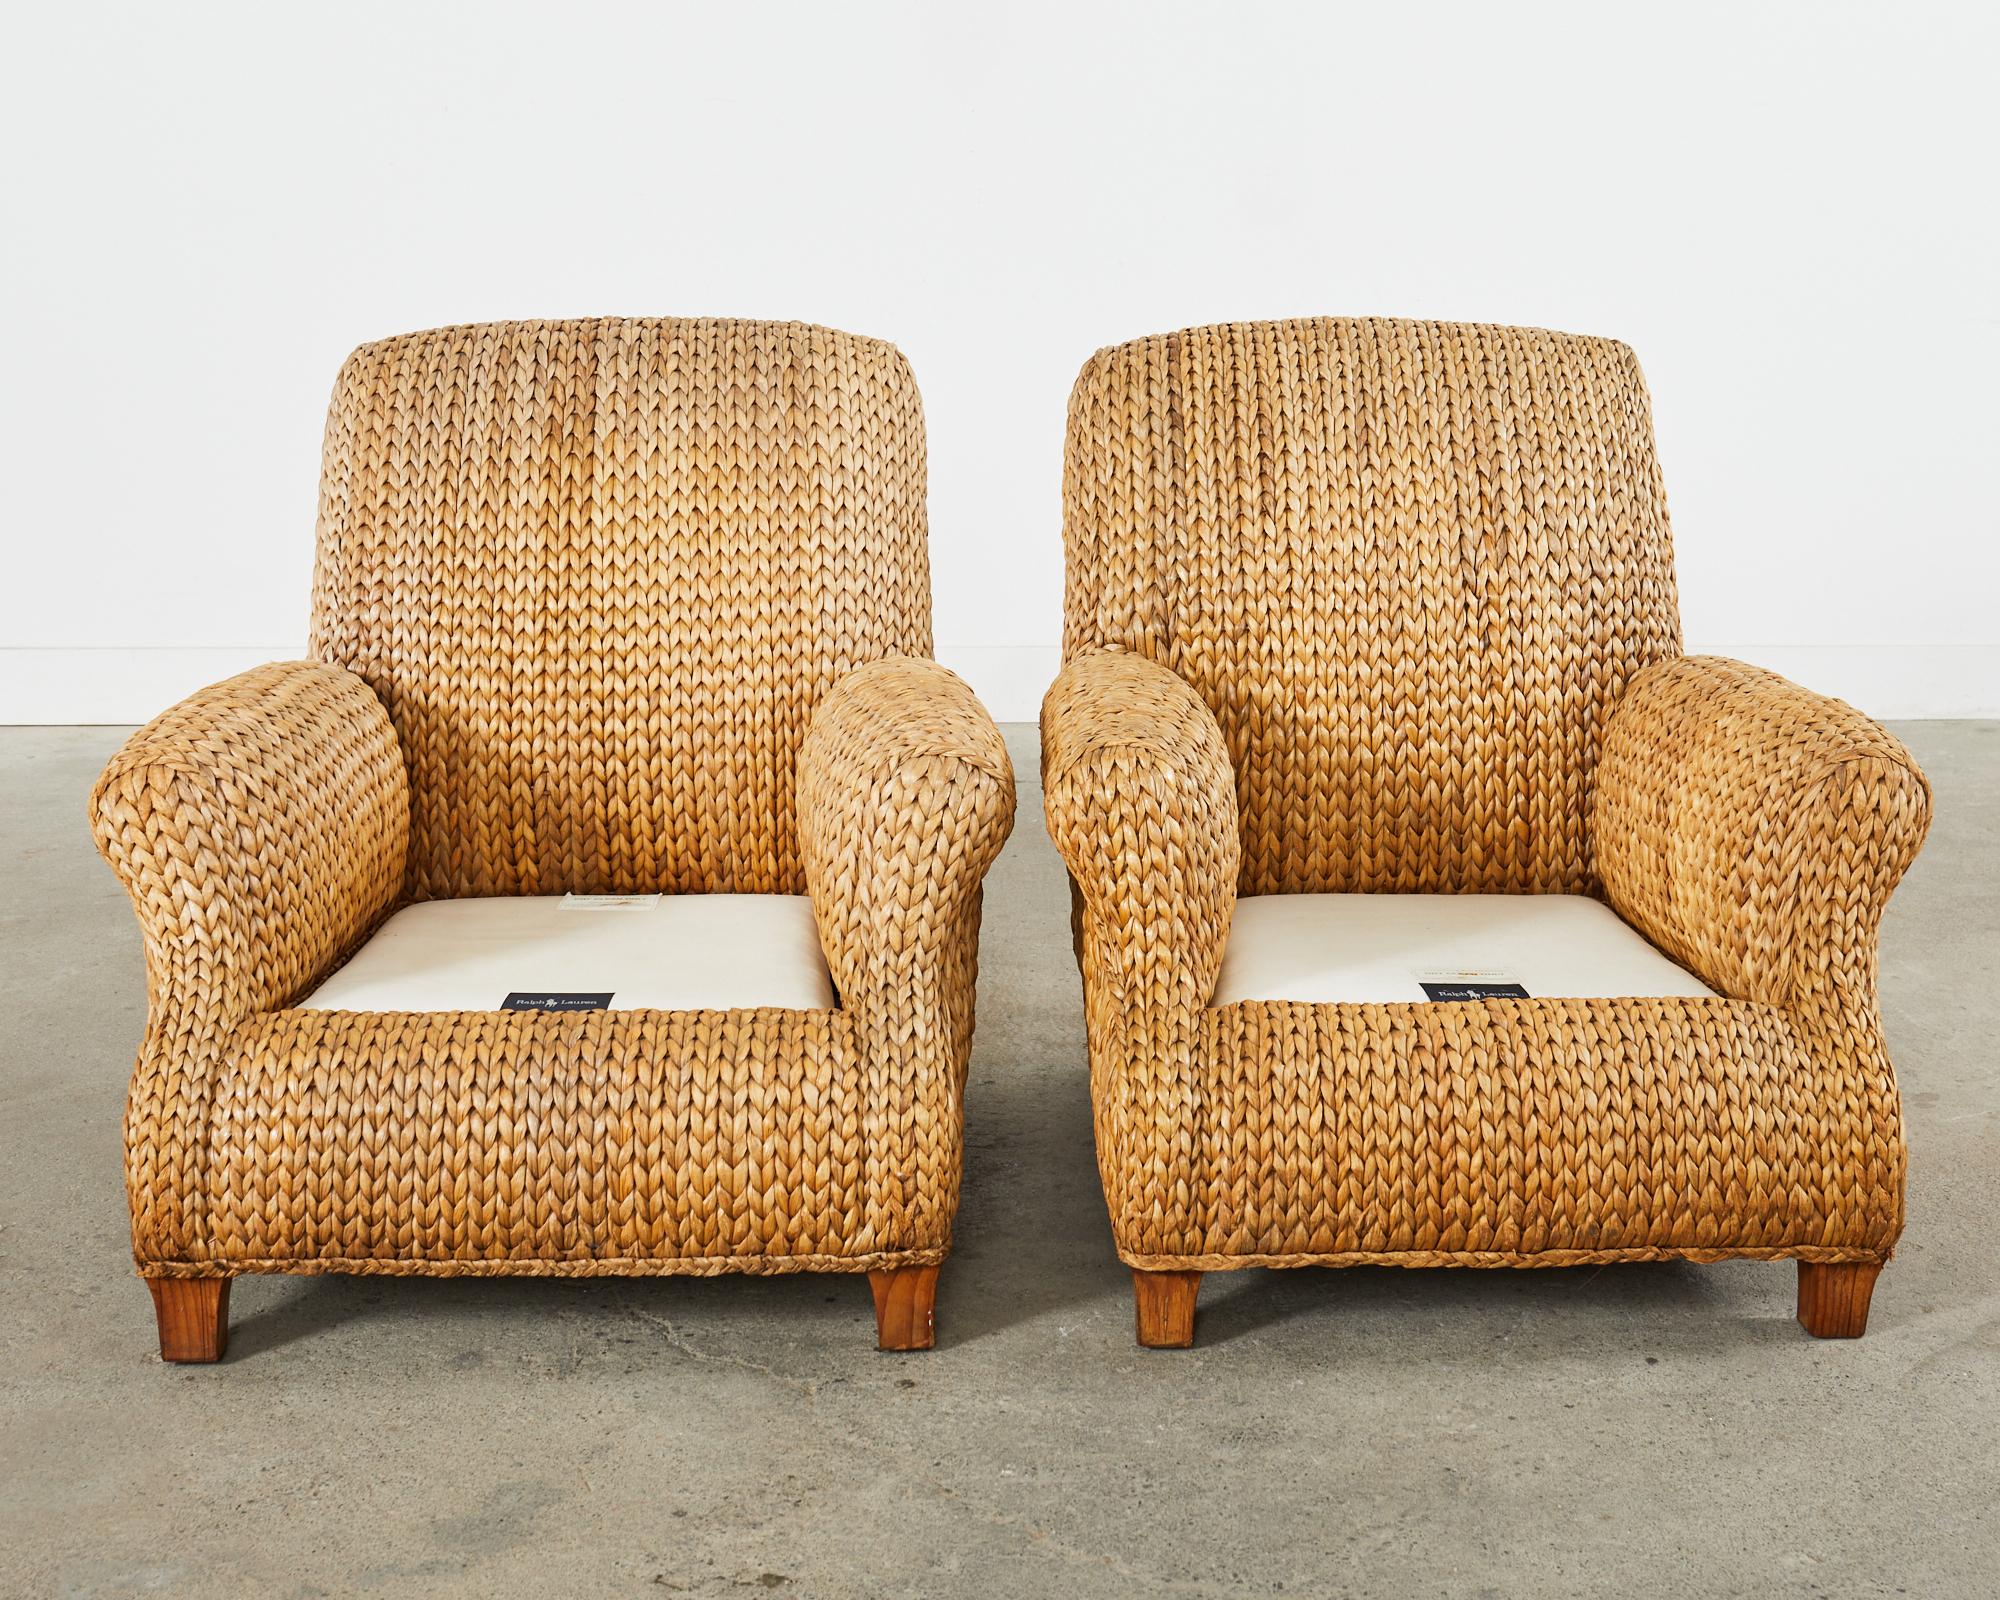 Rattan Pair of Ralph Lauren Organic Modern Seagrass Lounge Chairs For Sale